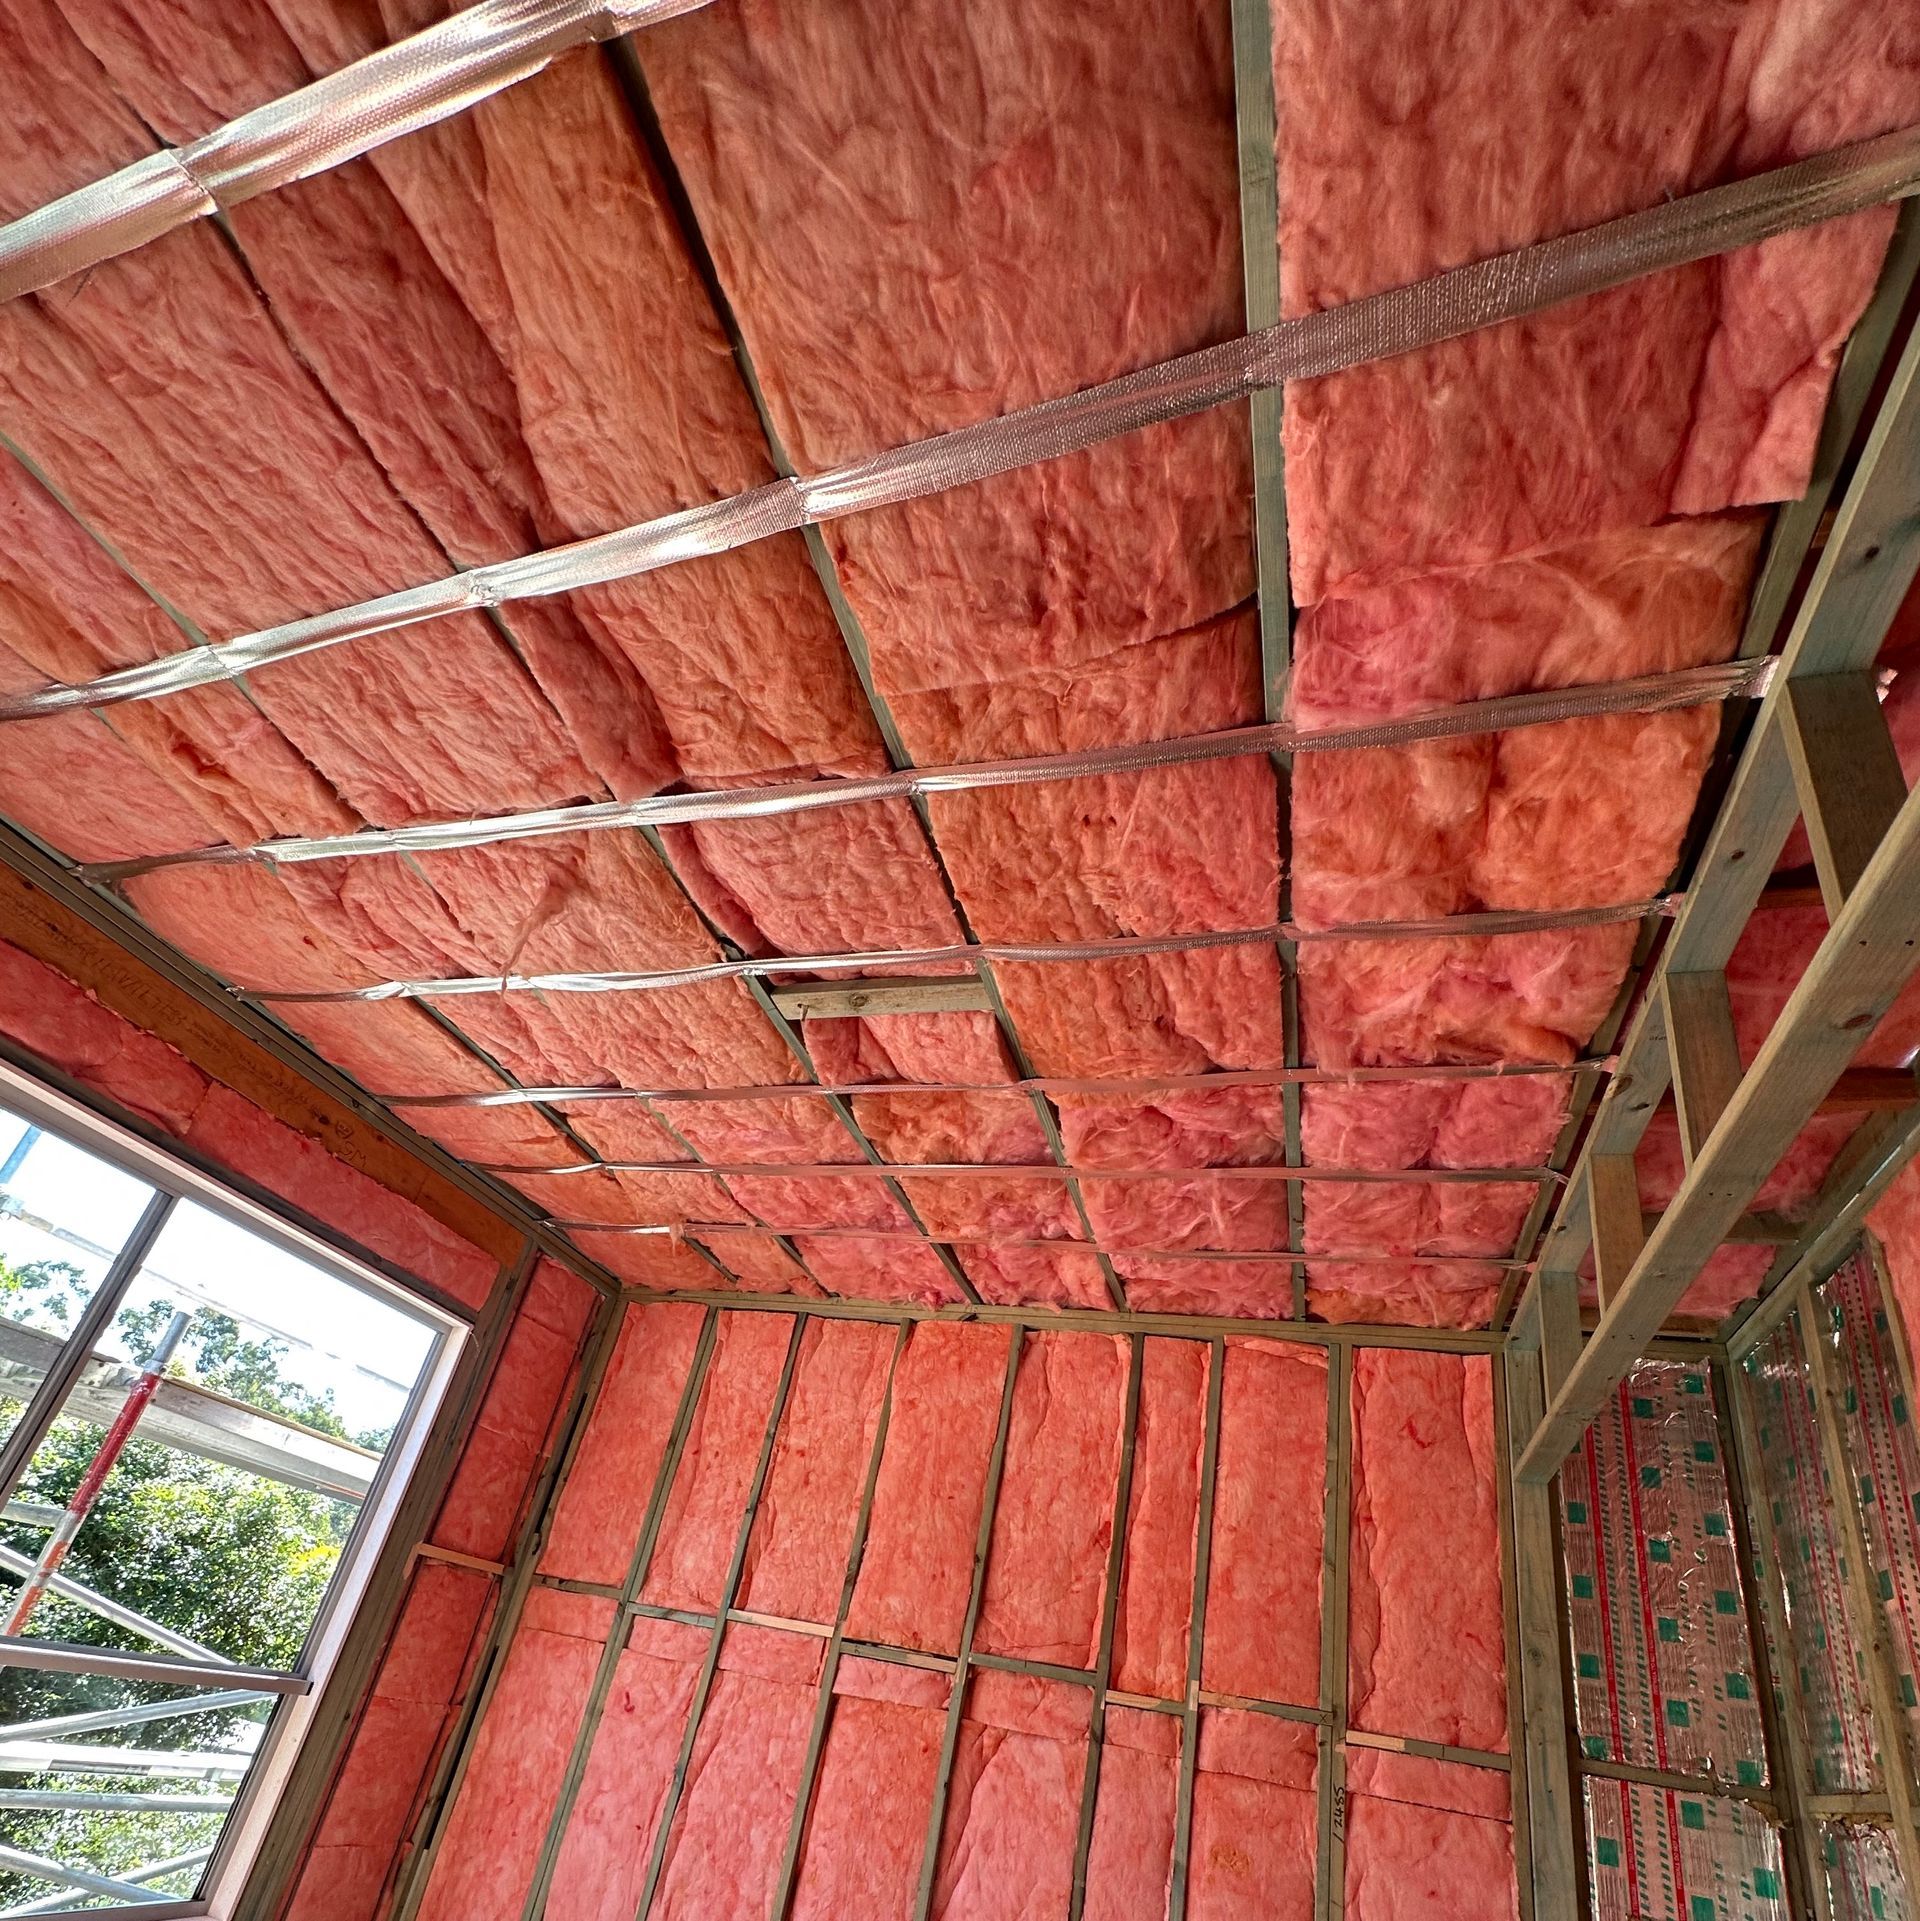 Insulation in Roof and Wall